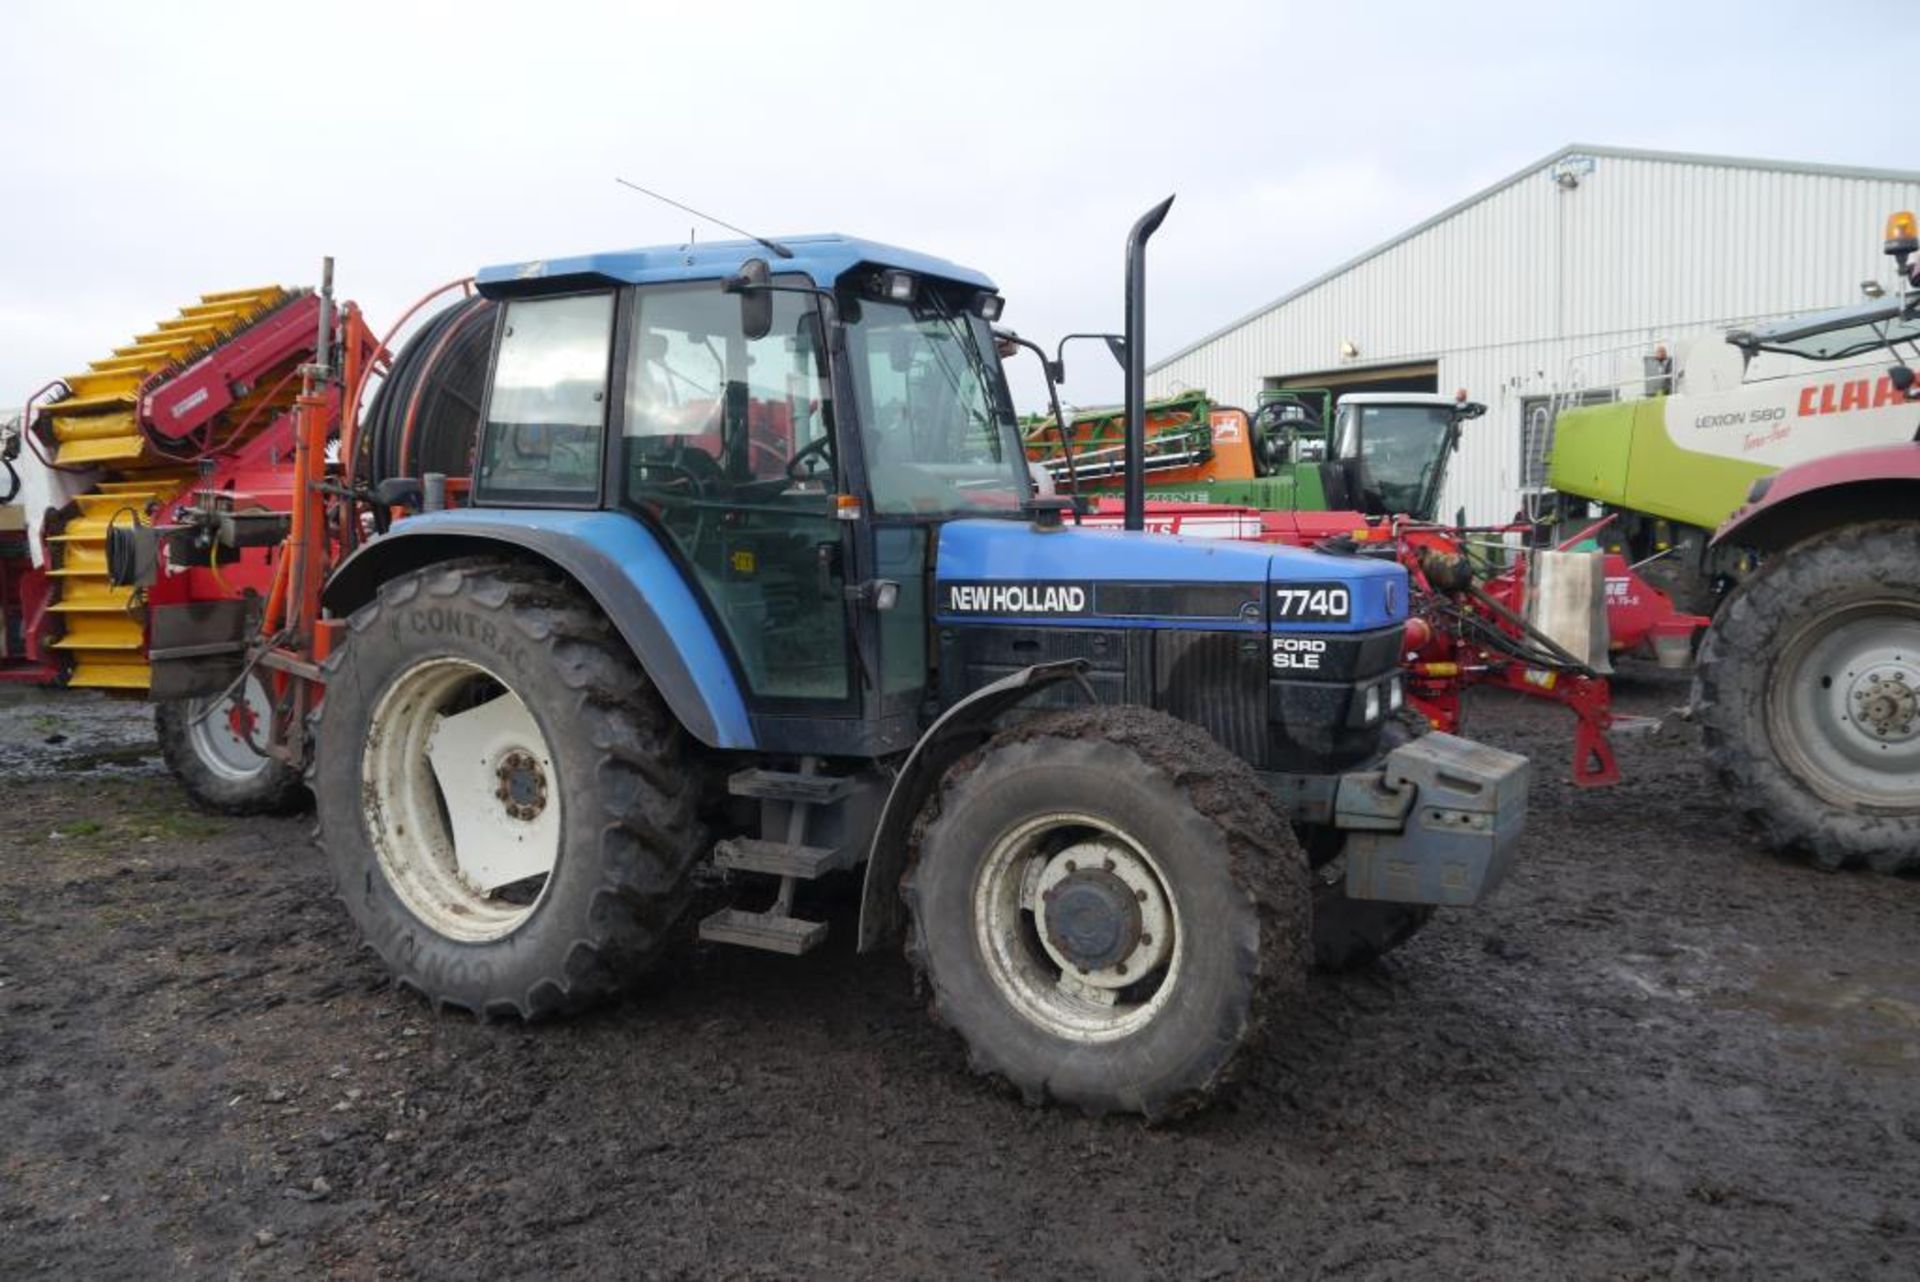 1998 NEW HOLLAND 7740 4wd TRACTOR Fitted with front weights and puh on 420/85R38 rear and 14.9R24